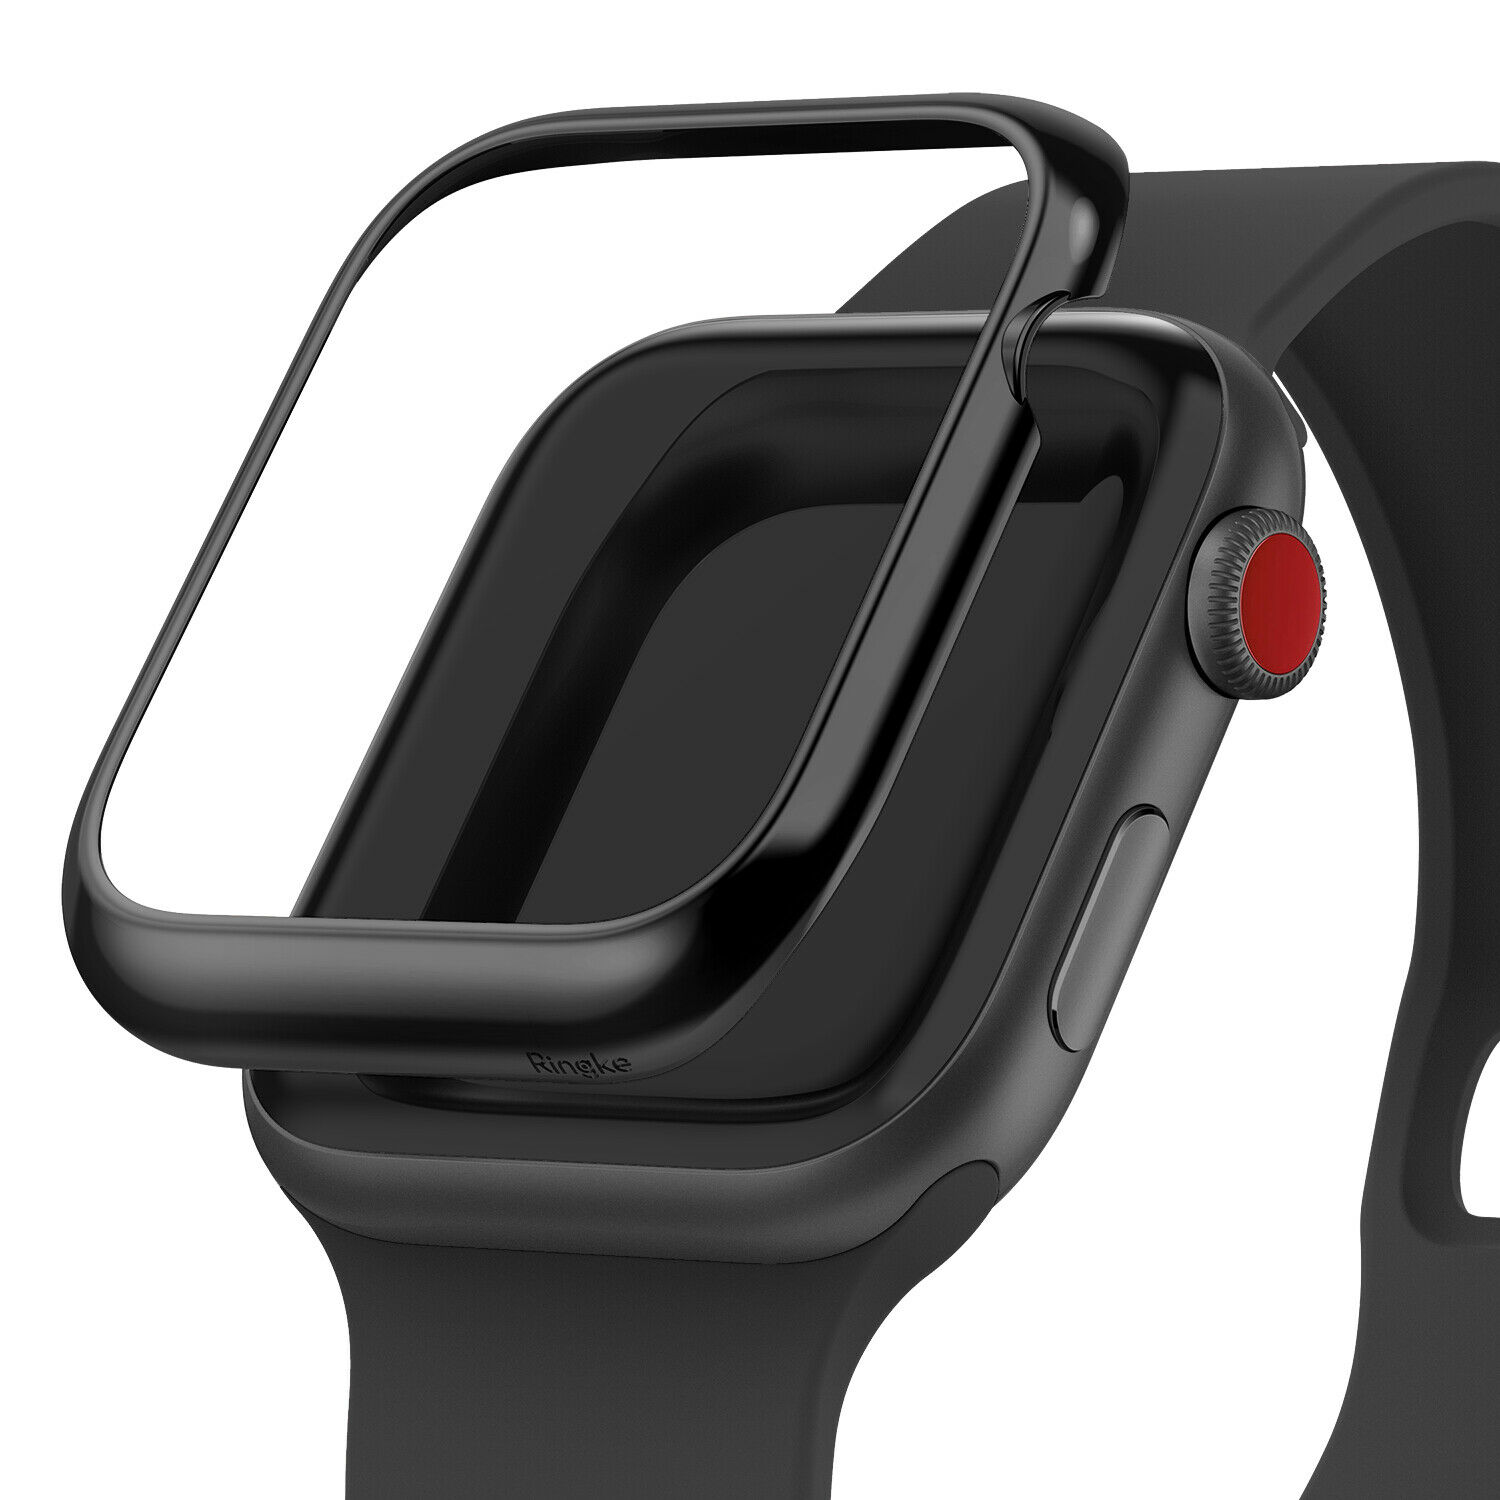 For Apple Watch Series 3 / 2 / 1 Case (38mm, 42mm) | Ringke Bezel Styling Cover